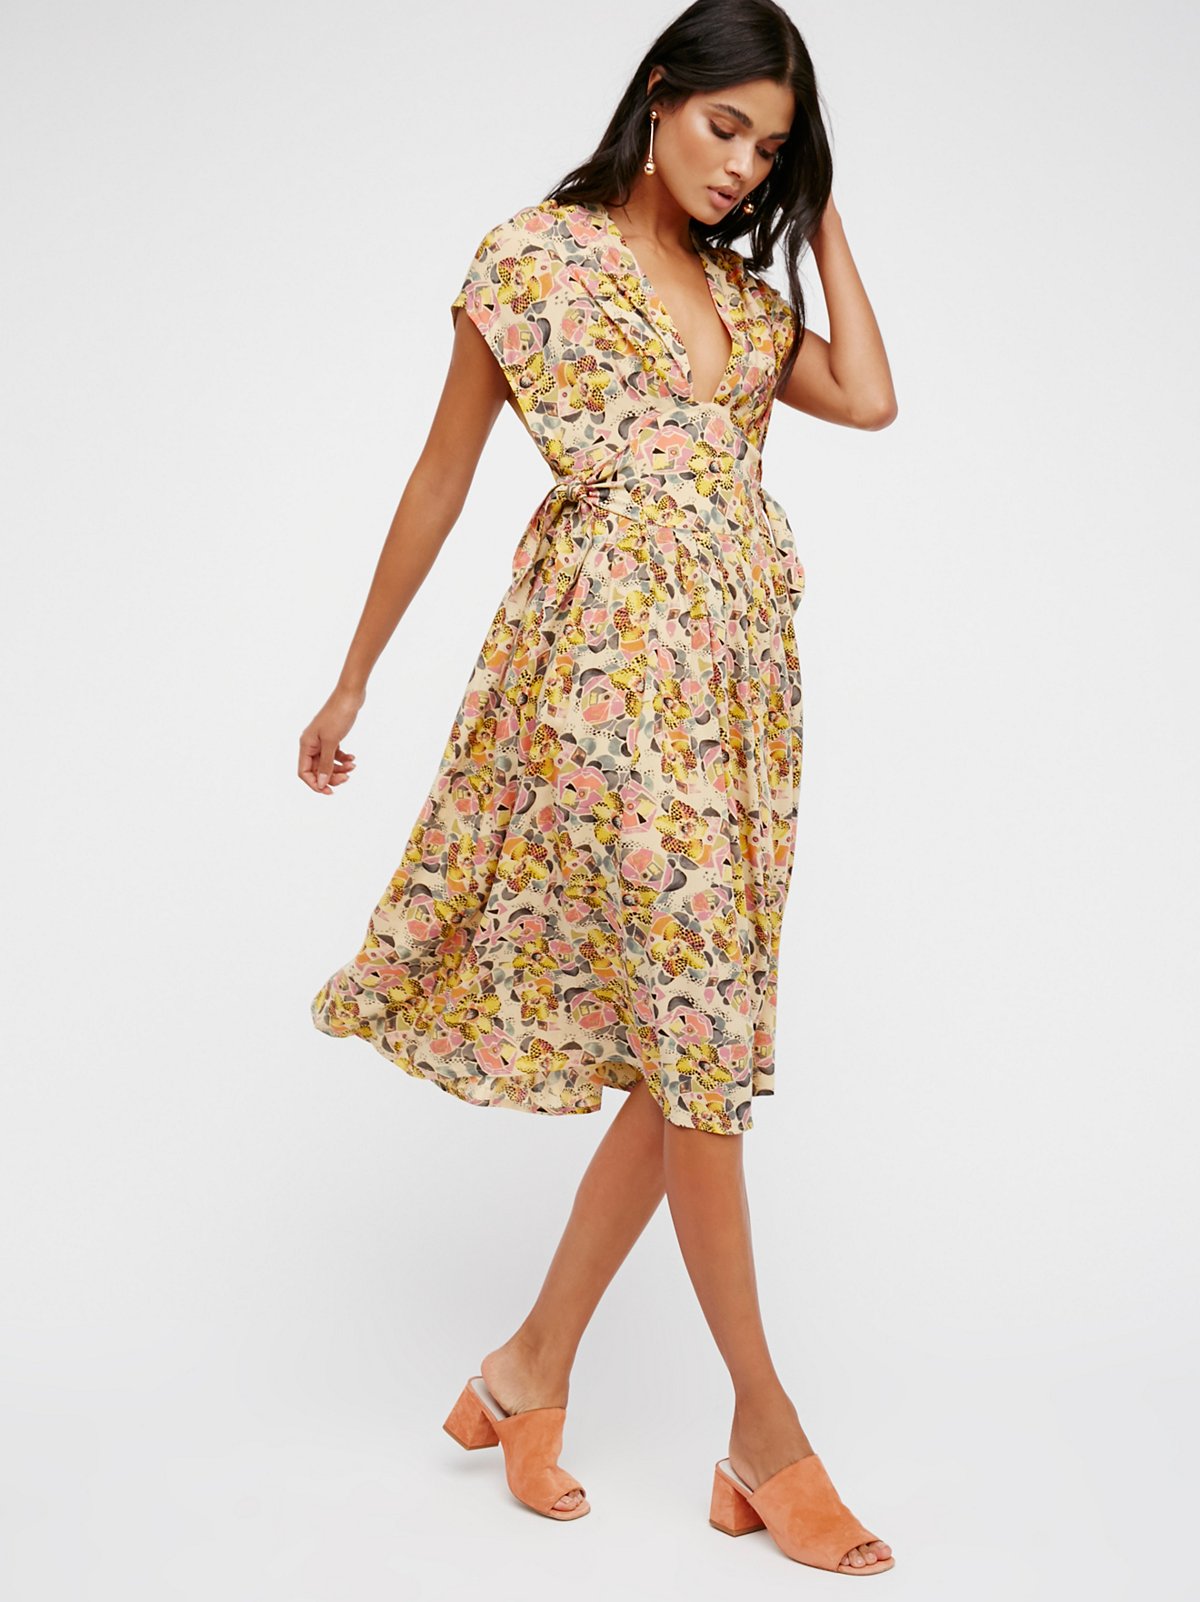 Fitting In Floral Midi Dress at Free People Clothing Boutique